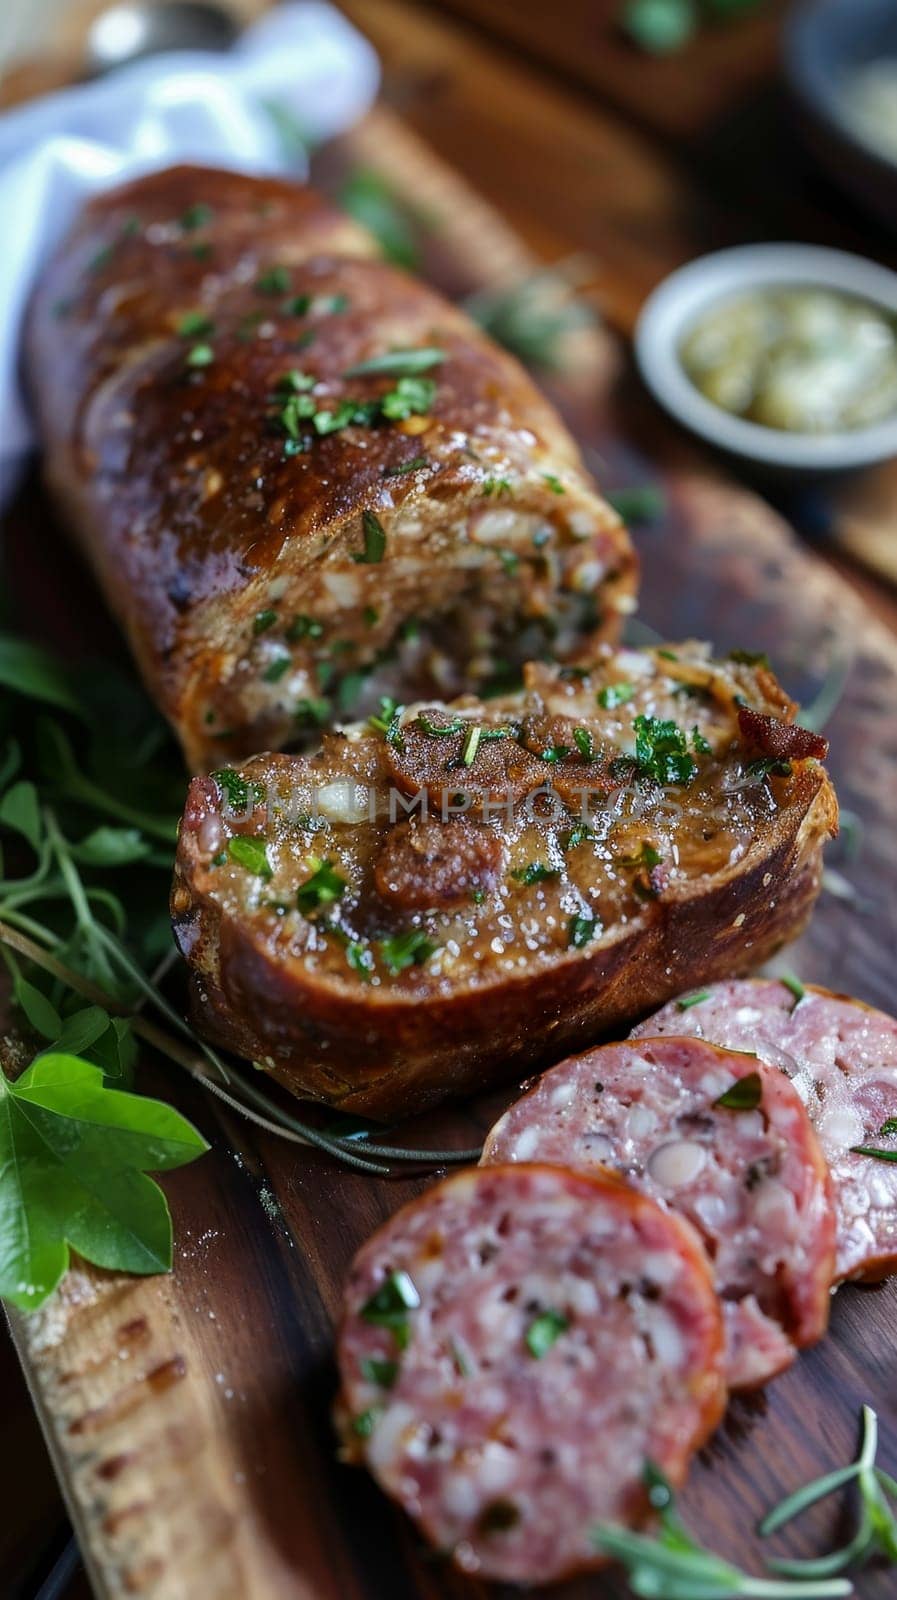 A succulent stuffed meatloaf served on a rustic wooden board, garnished with fresh herbs, ready for a delicious meal. by sfinks